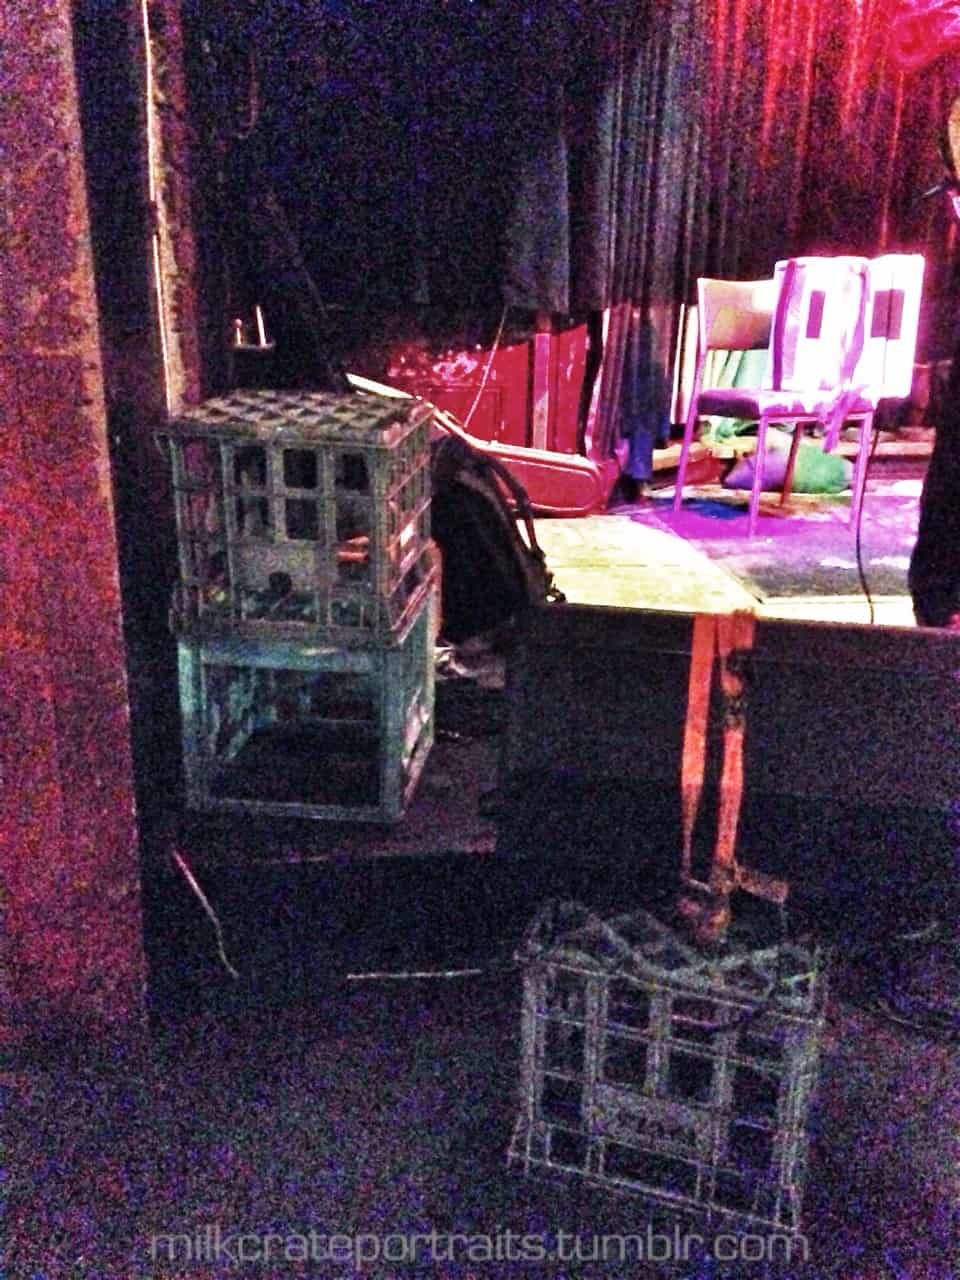 Crates in the dark at the Old Bar